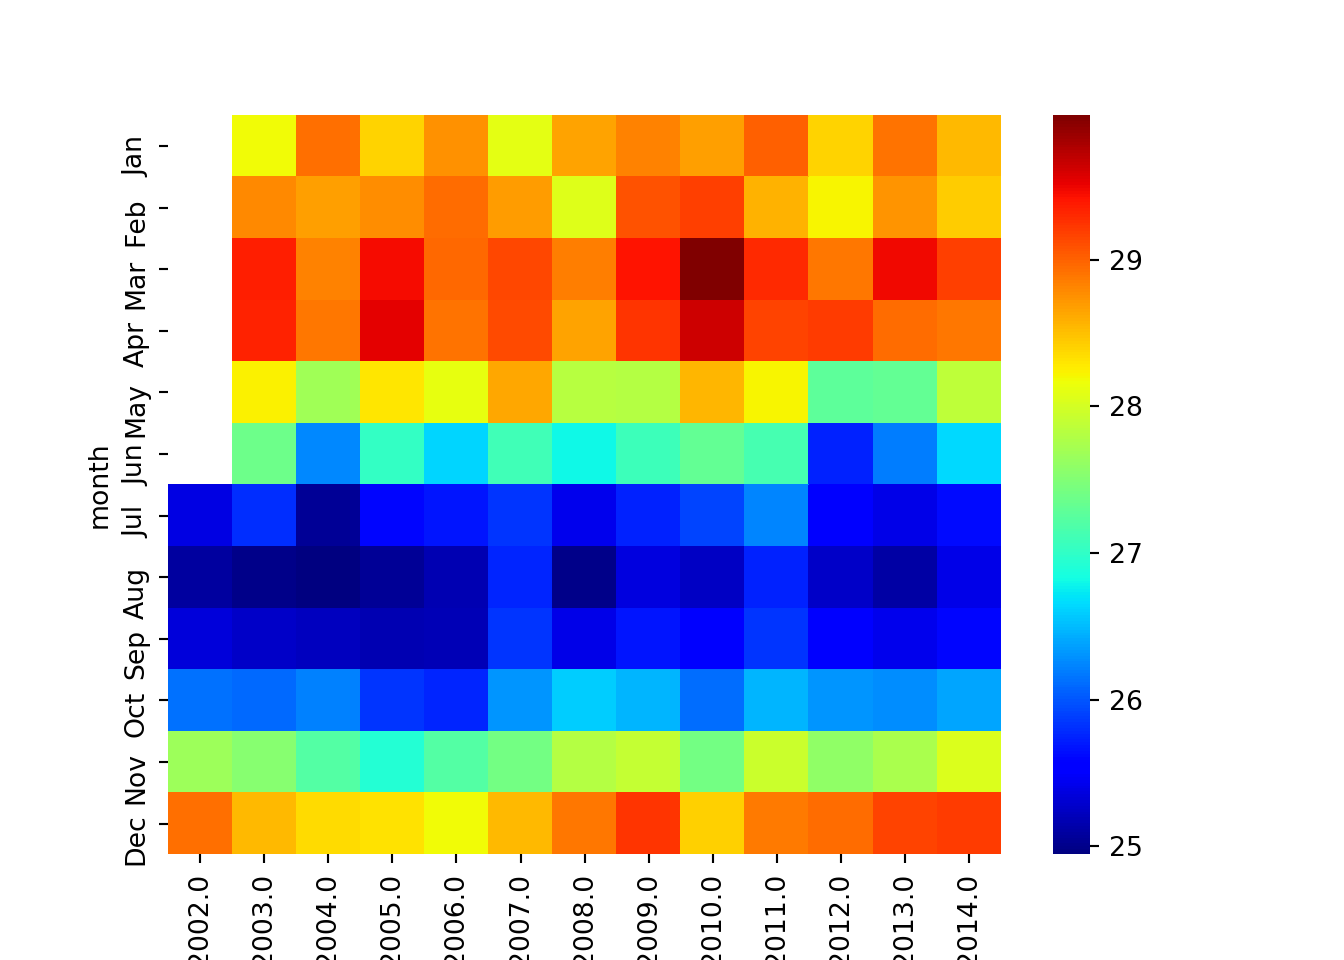 heatmaps showing variation of SST over years and months